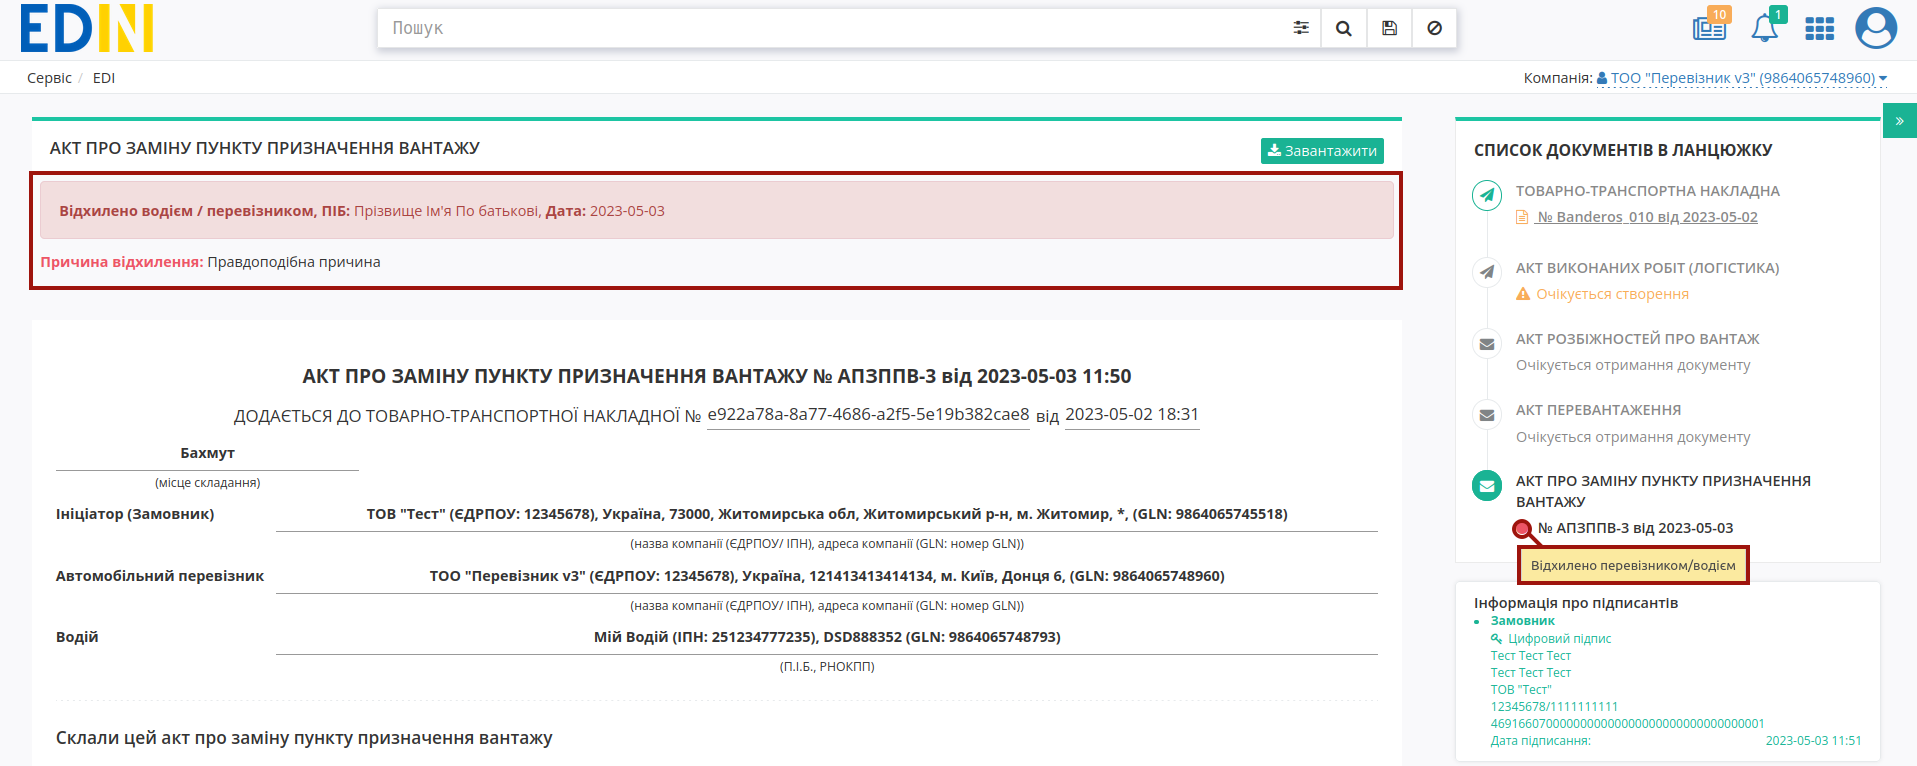 ../_images/Consignee_Change_Act_Reject_006.png